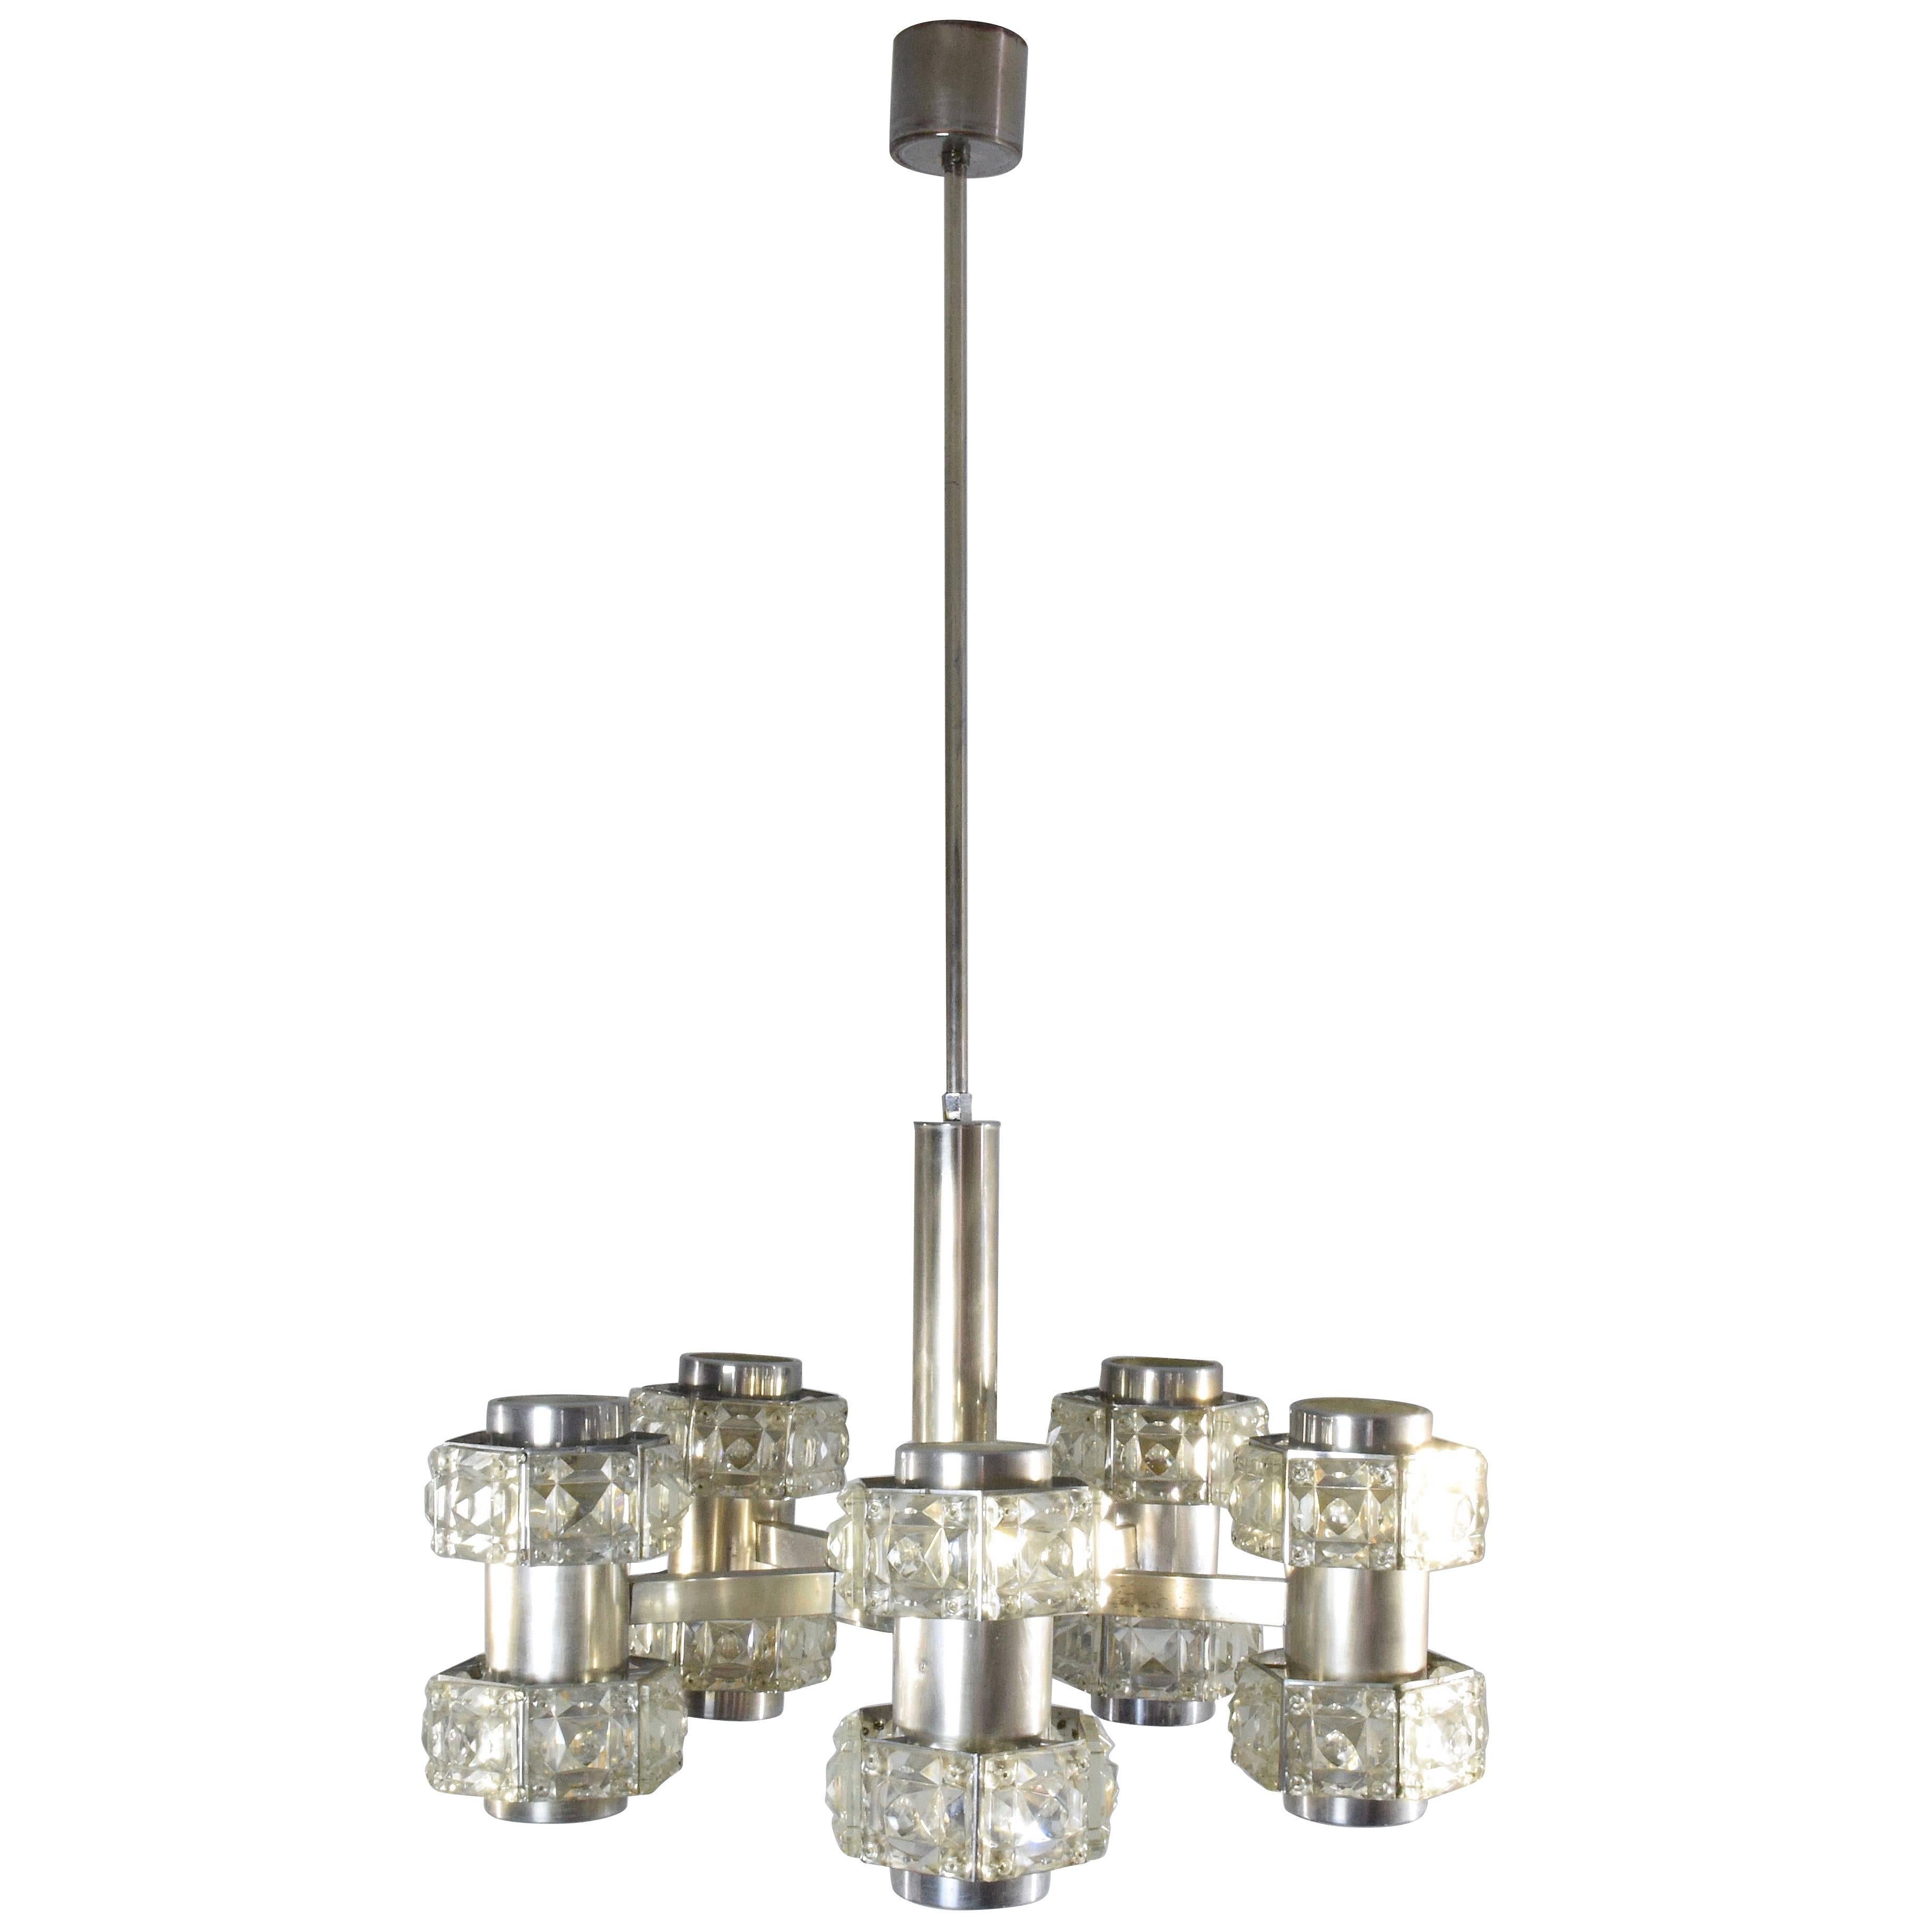 A 20th-century vintage Italian chandelier or pendant light fixture designed with five sublime pentagonal blown cut glass symmetrical lights totaling ten sockets mounted on a modern stainless steel structure.
Italy, circa 1960s-1970s. 
The rod can be